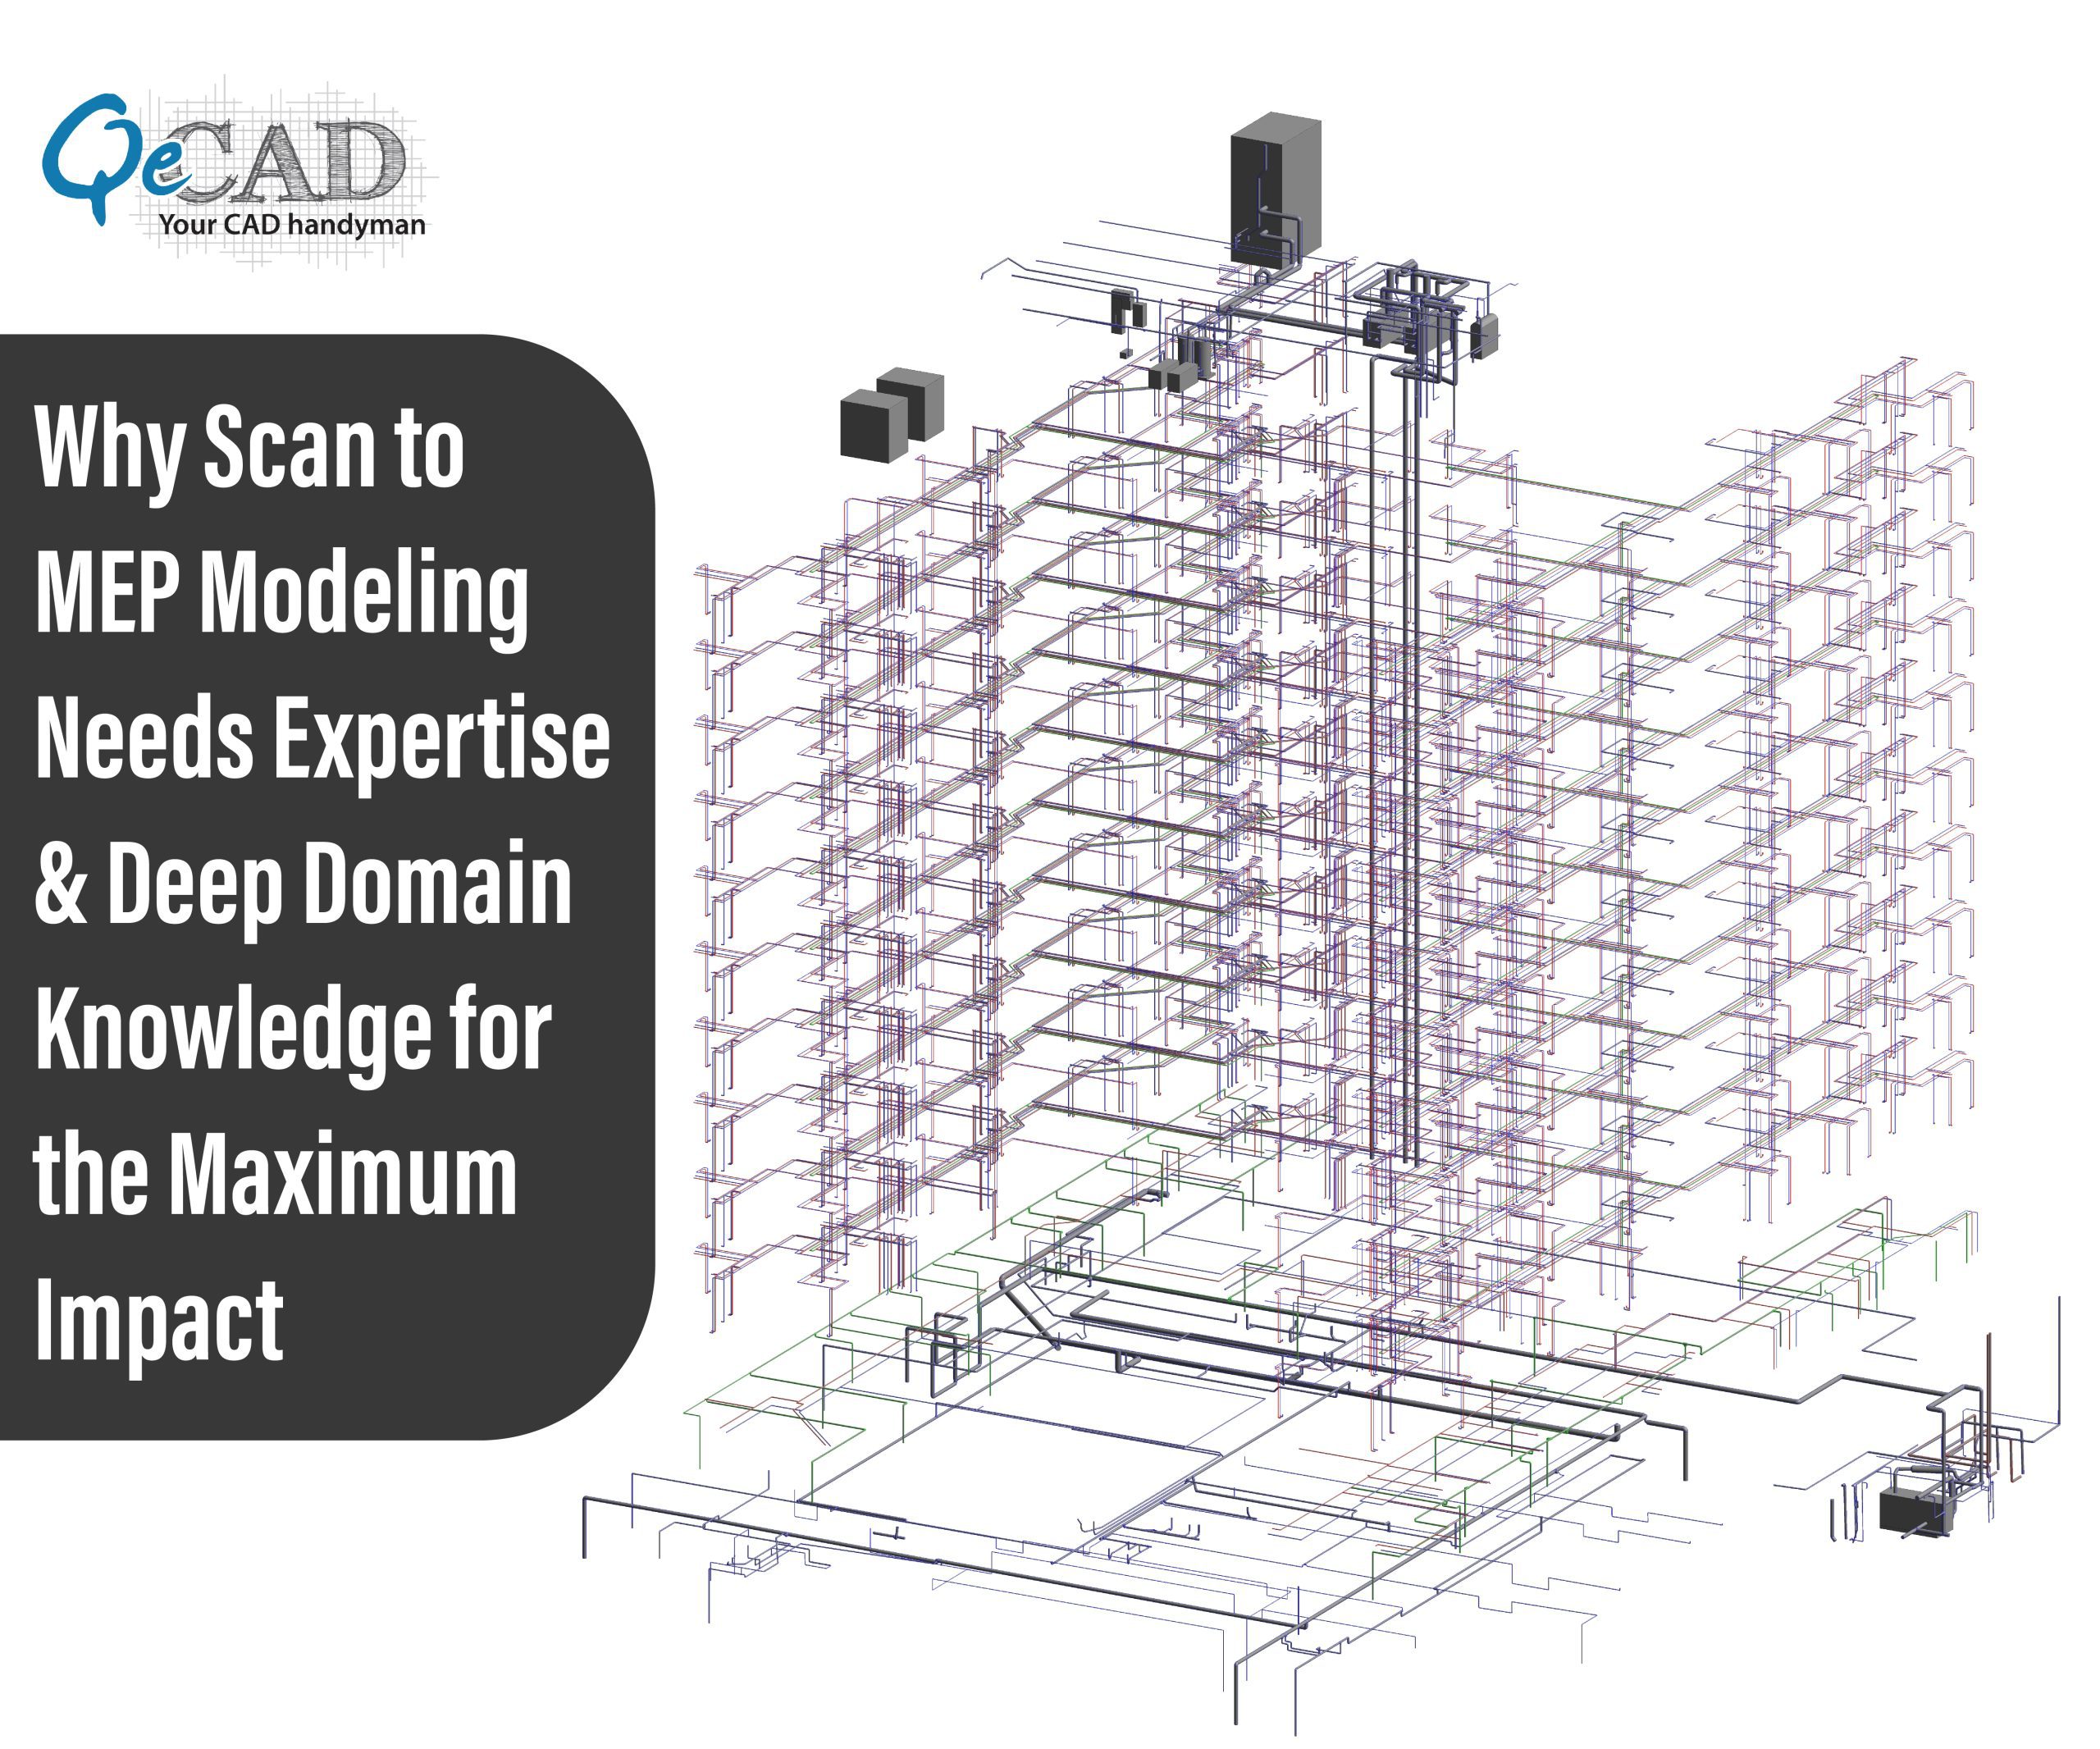 Why Scan to MEP Modeling Needs Expertise and Deep Domain Knowledge for the Maximum Impact